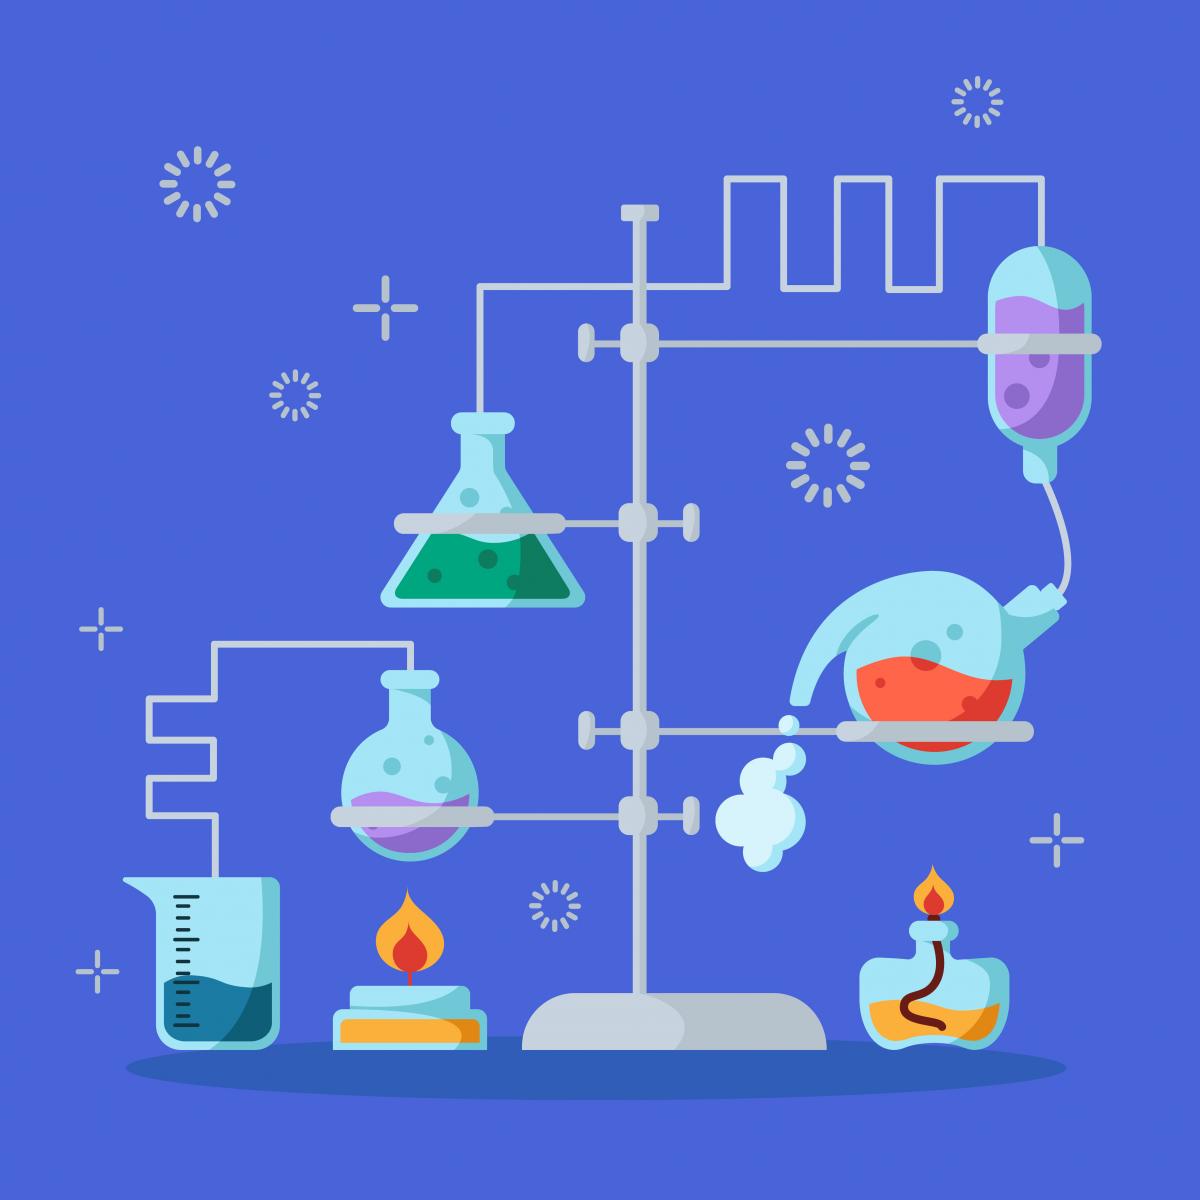 Cartoon of an experiment in chemistry. Beakers, flasks and other equipment